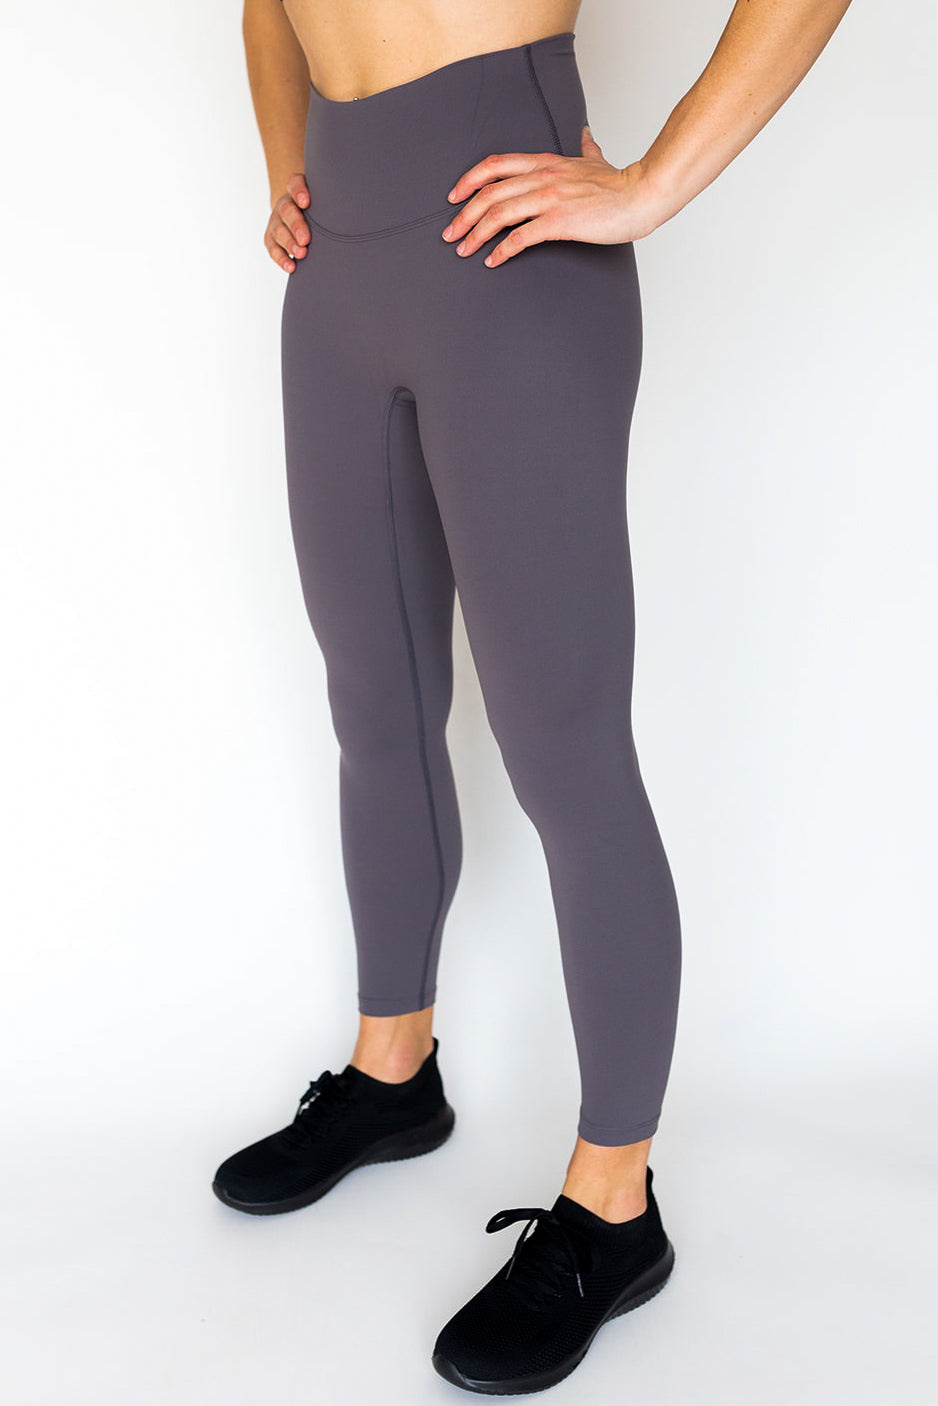 BARE activewear barely there pants. No size fits 4/6 best. VGUC